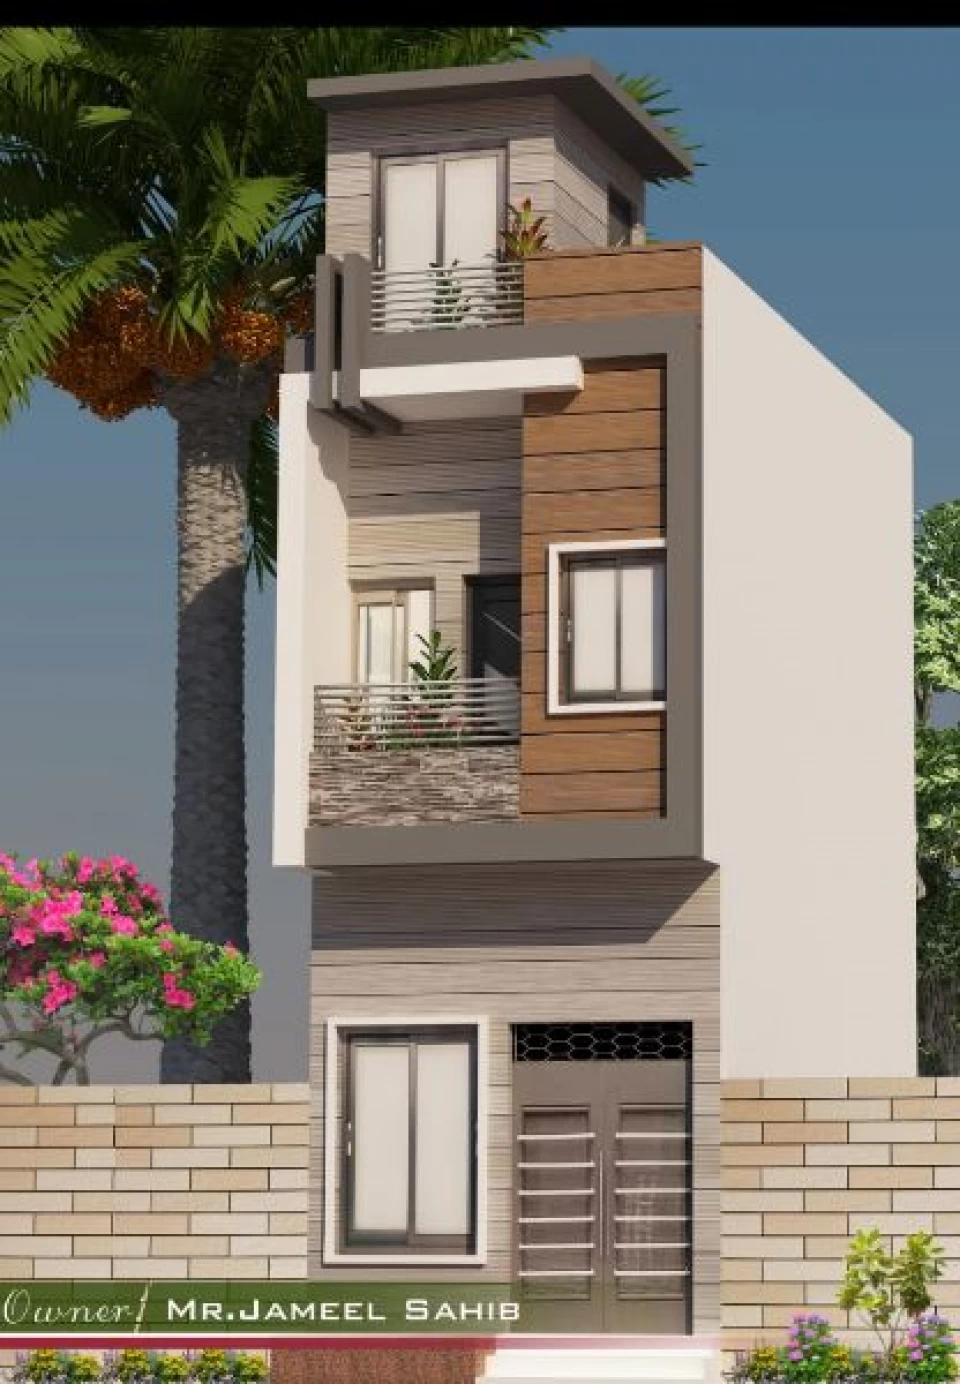 Zahid town single story house for sale